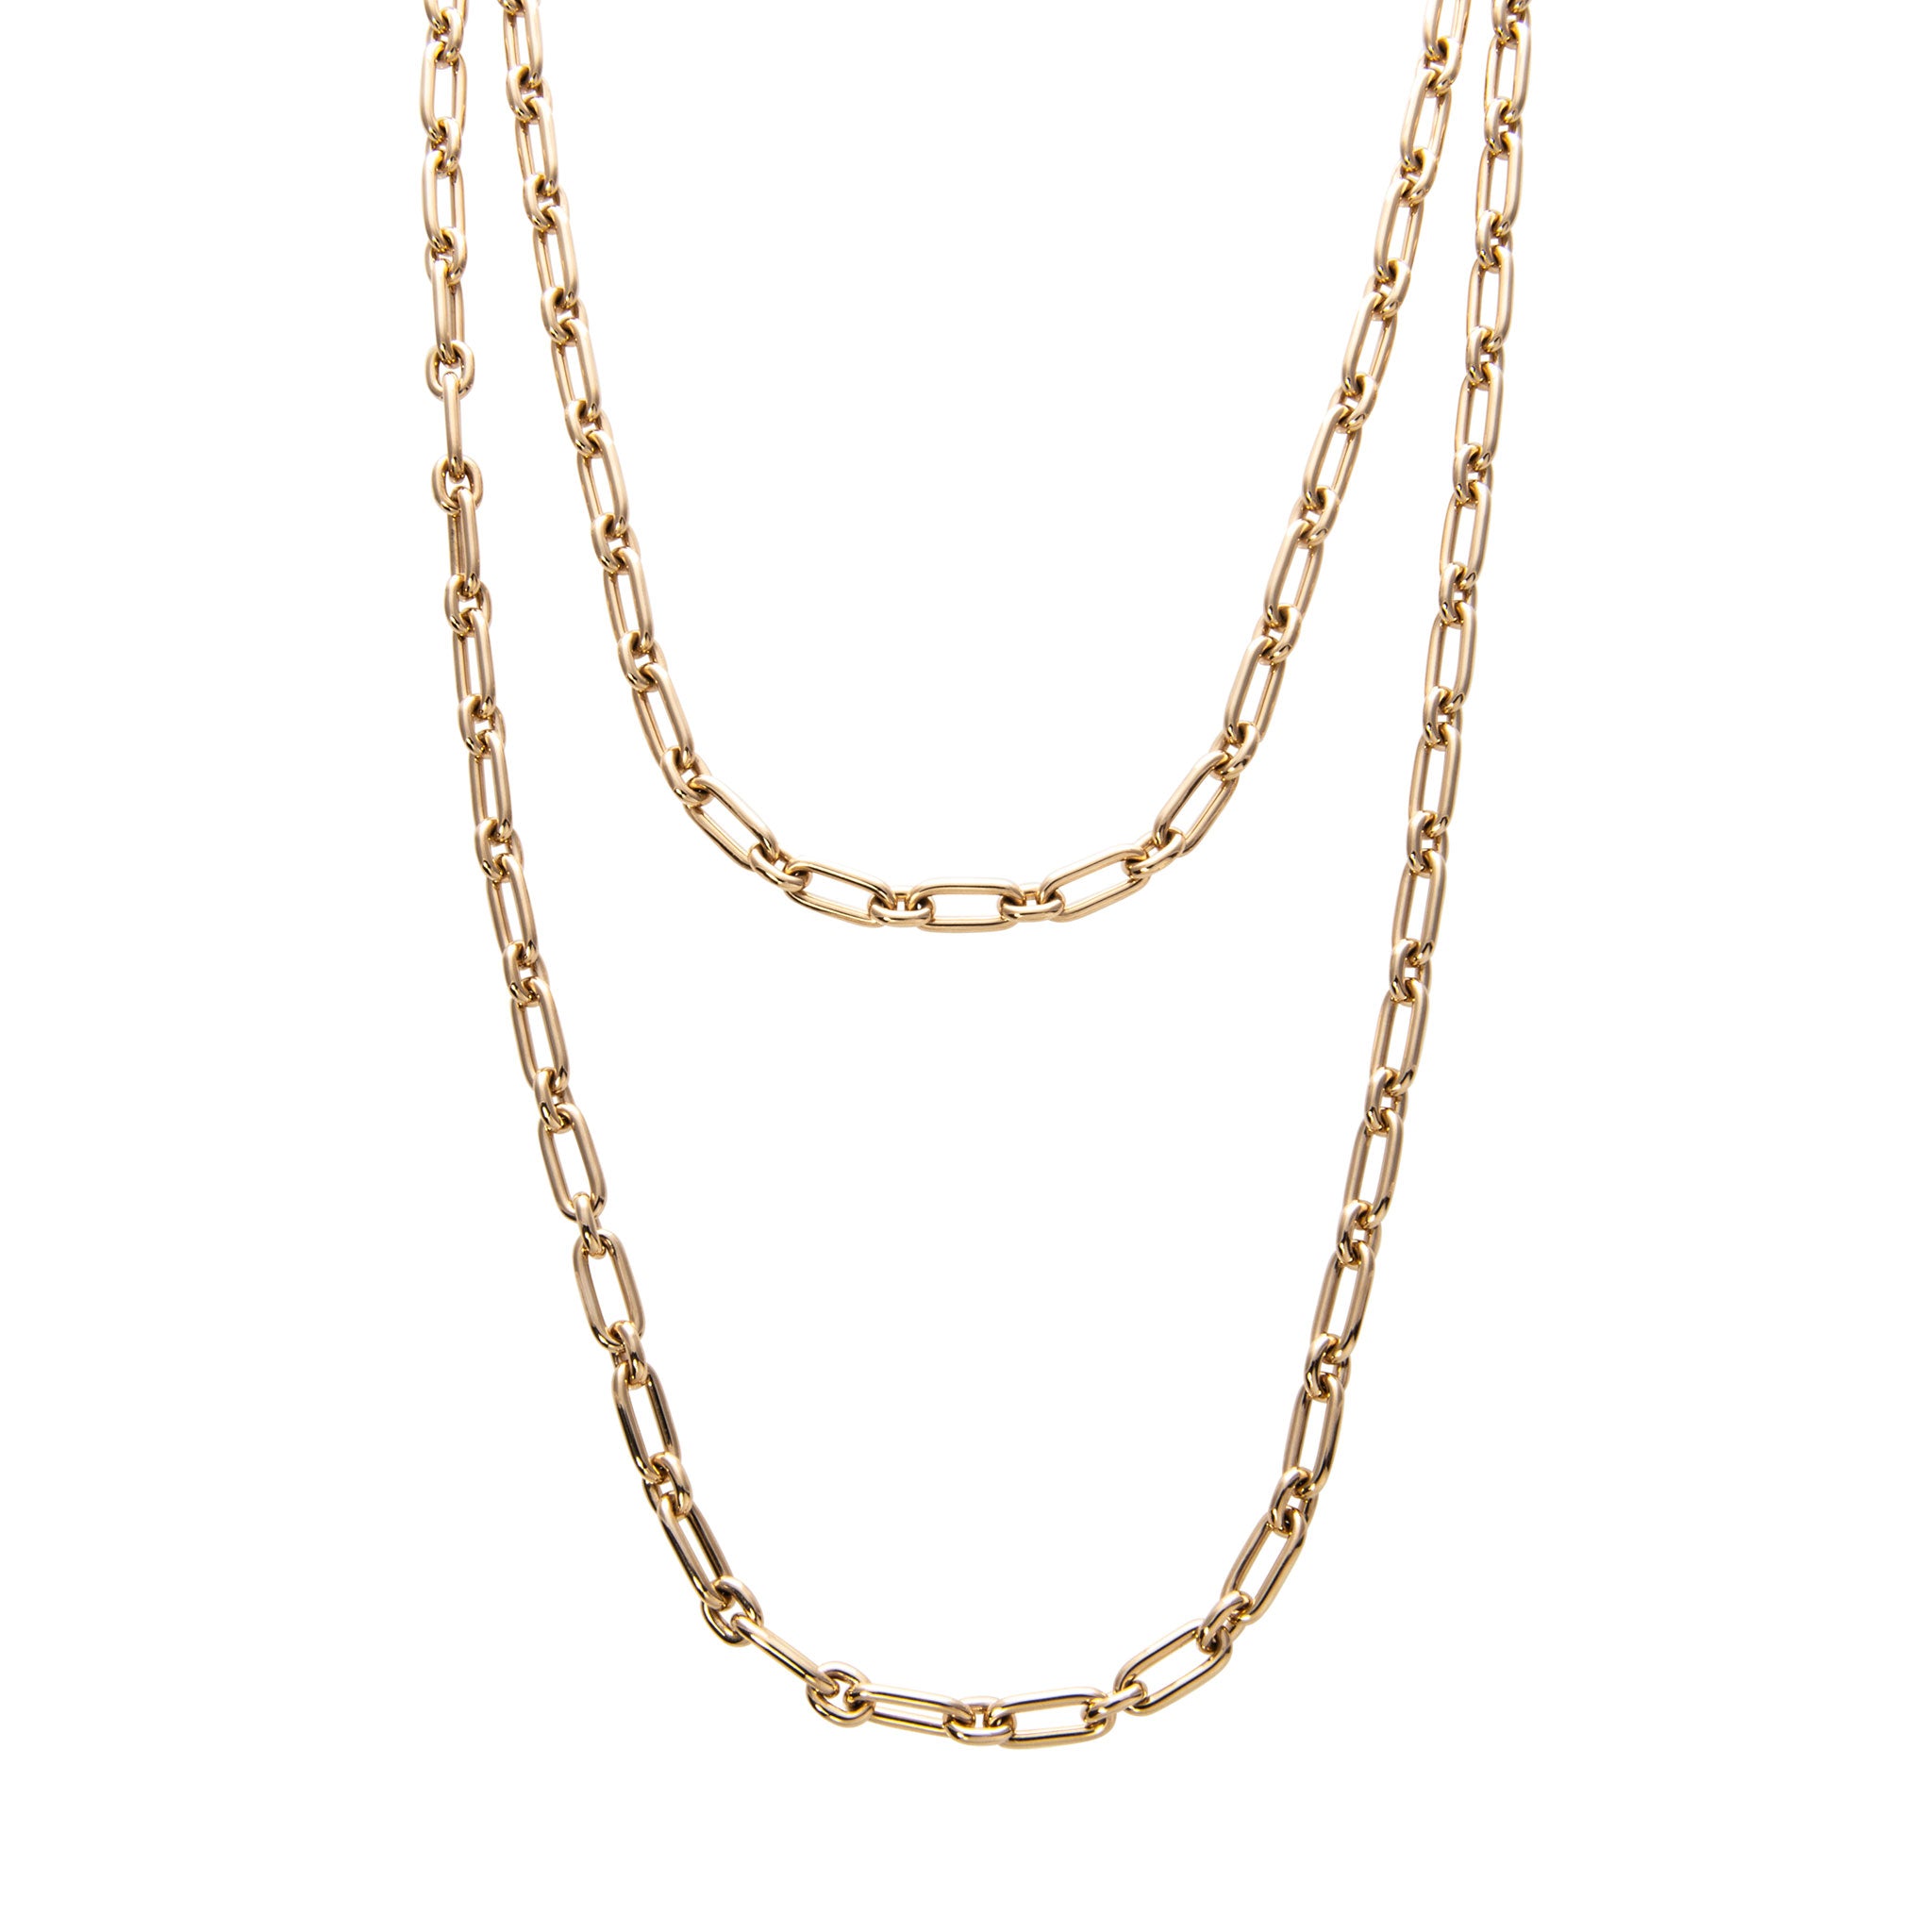 18K Yellow Gold Italian Oblong Oval Link Necklace